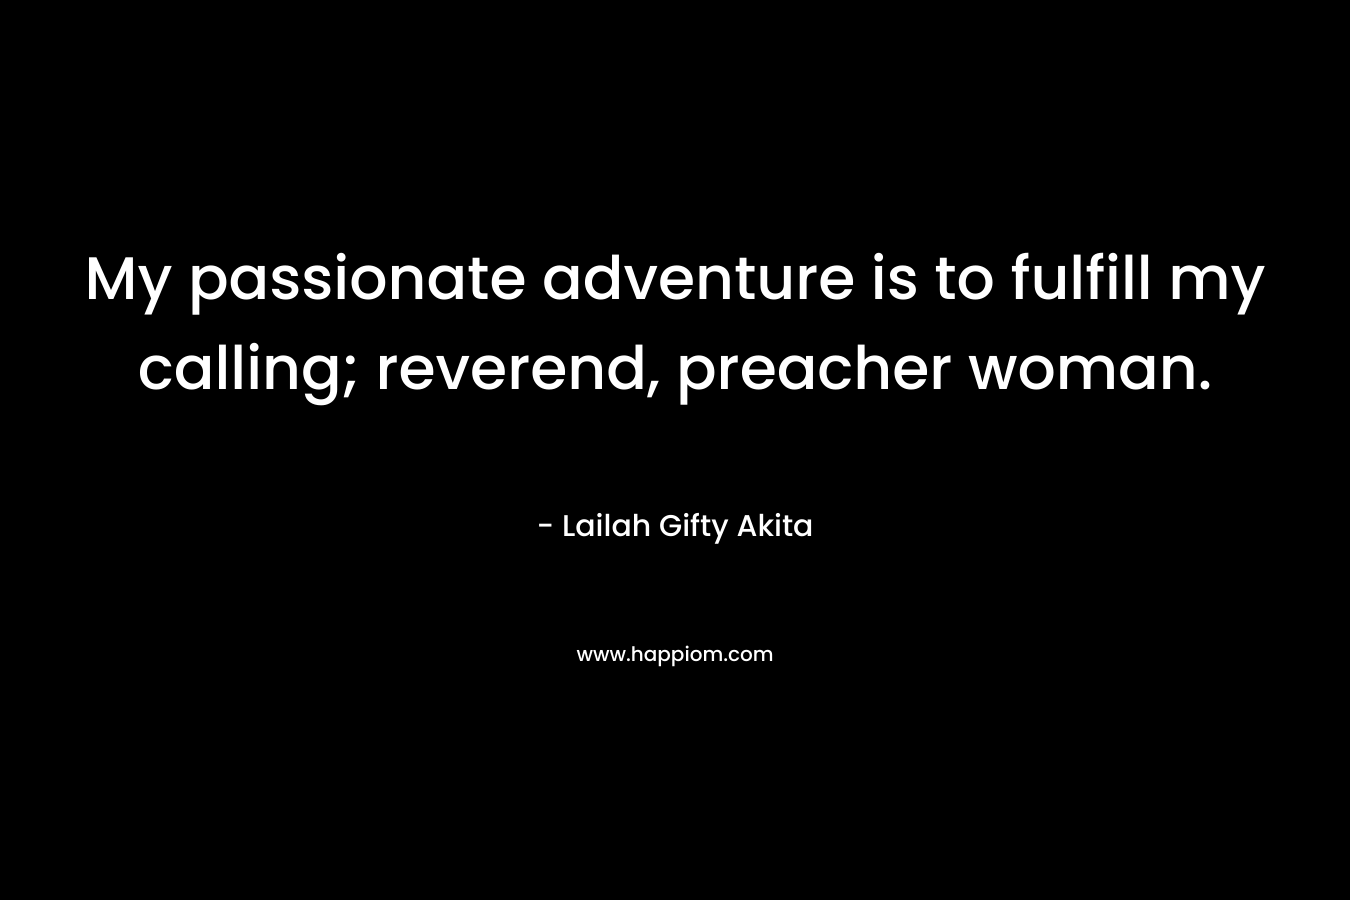 My passionate adventure is to fulfill my calling; reverend, preacher woman. – Lailah Gifty Akita